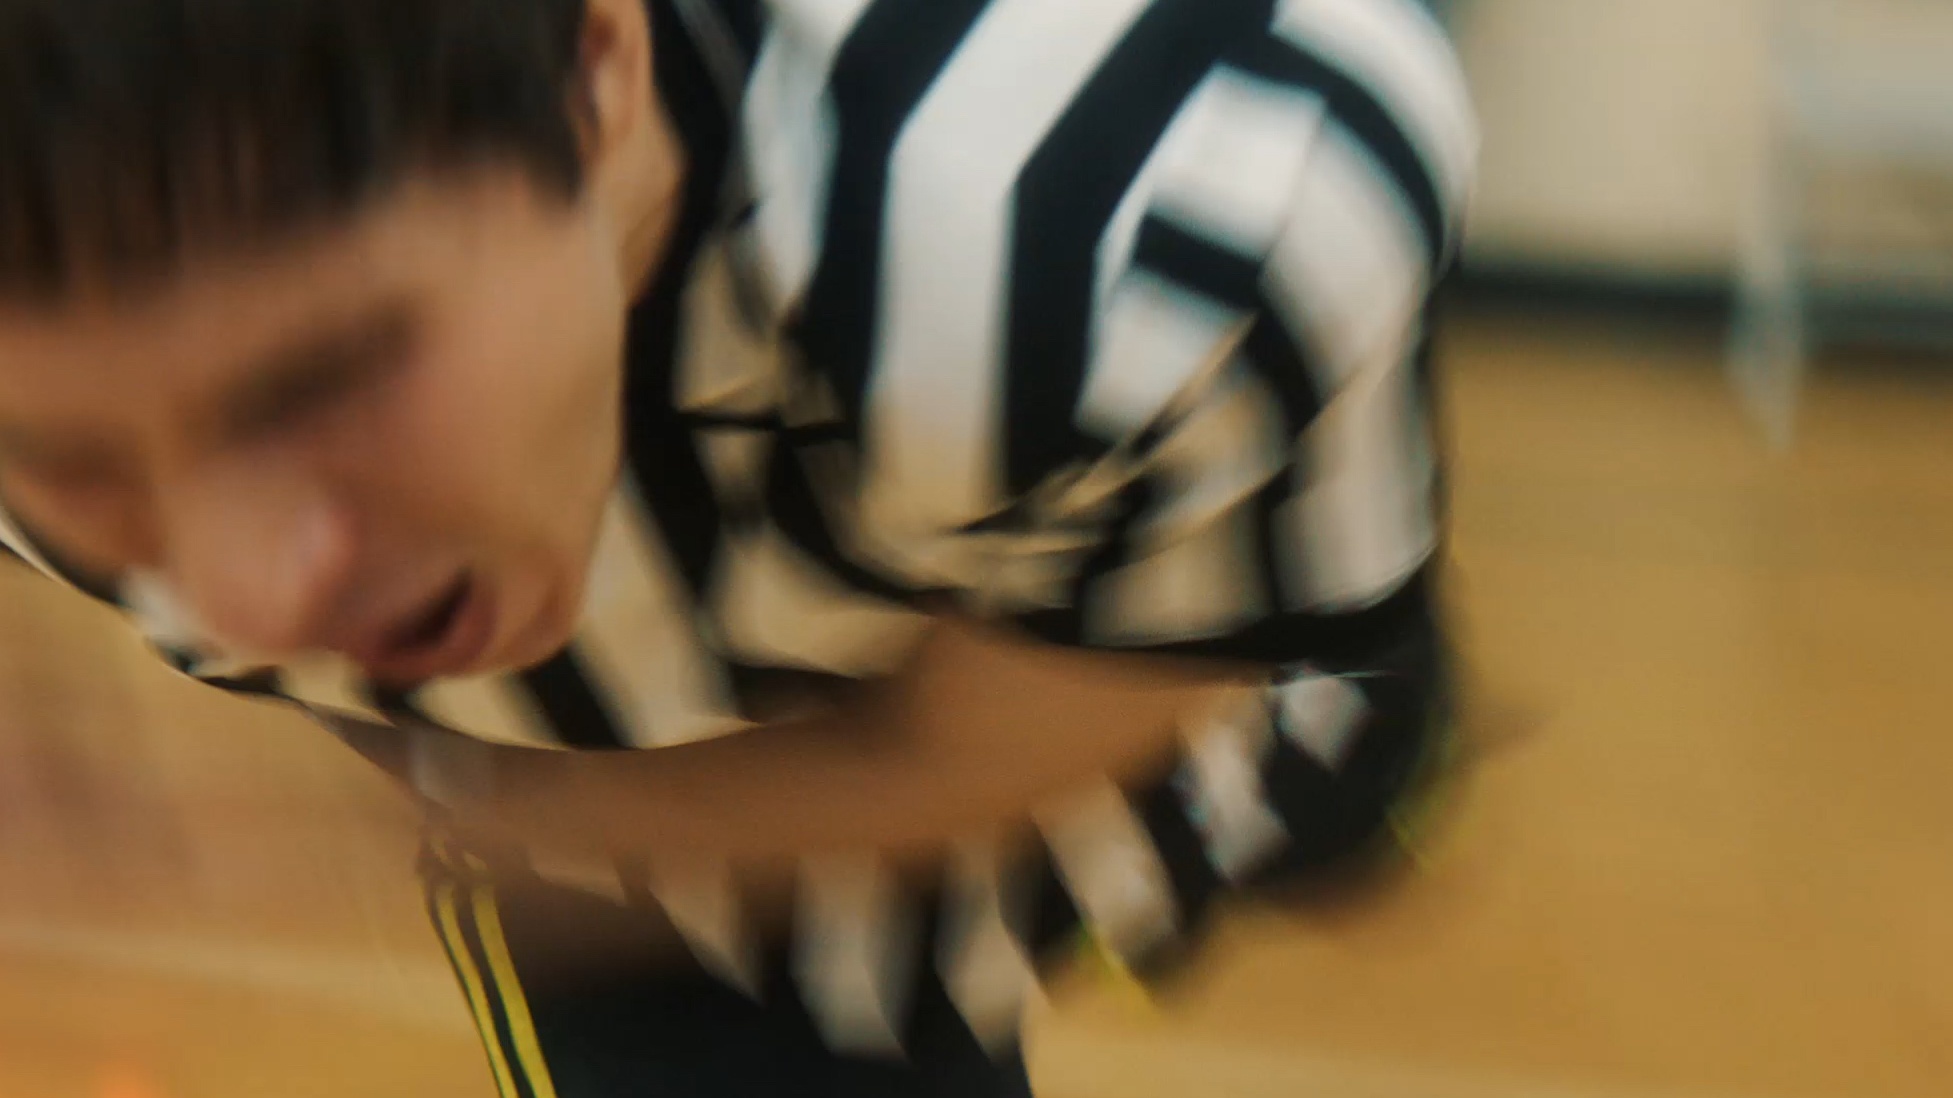 A blurry capture of a person in a referee's black-and-white striped jersey stumbling forward, mouth open, with a wooden gym floor in the background.